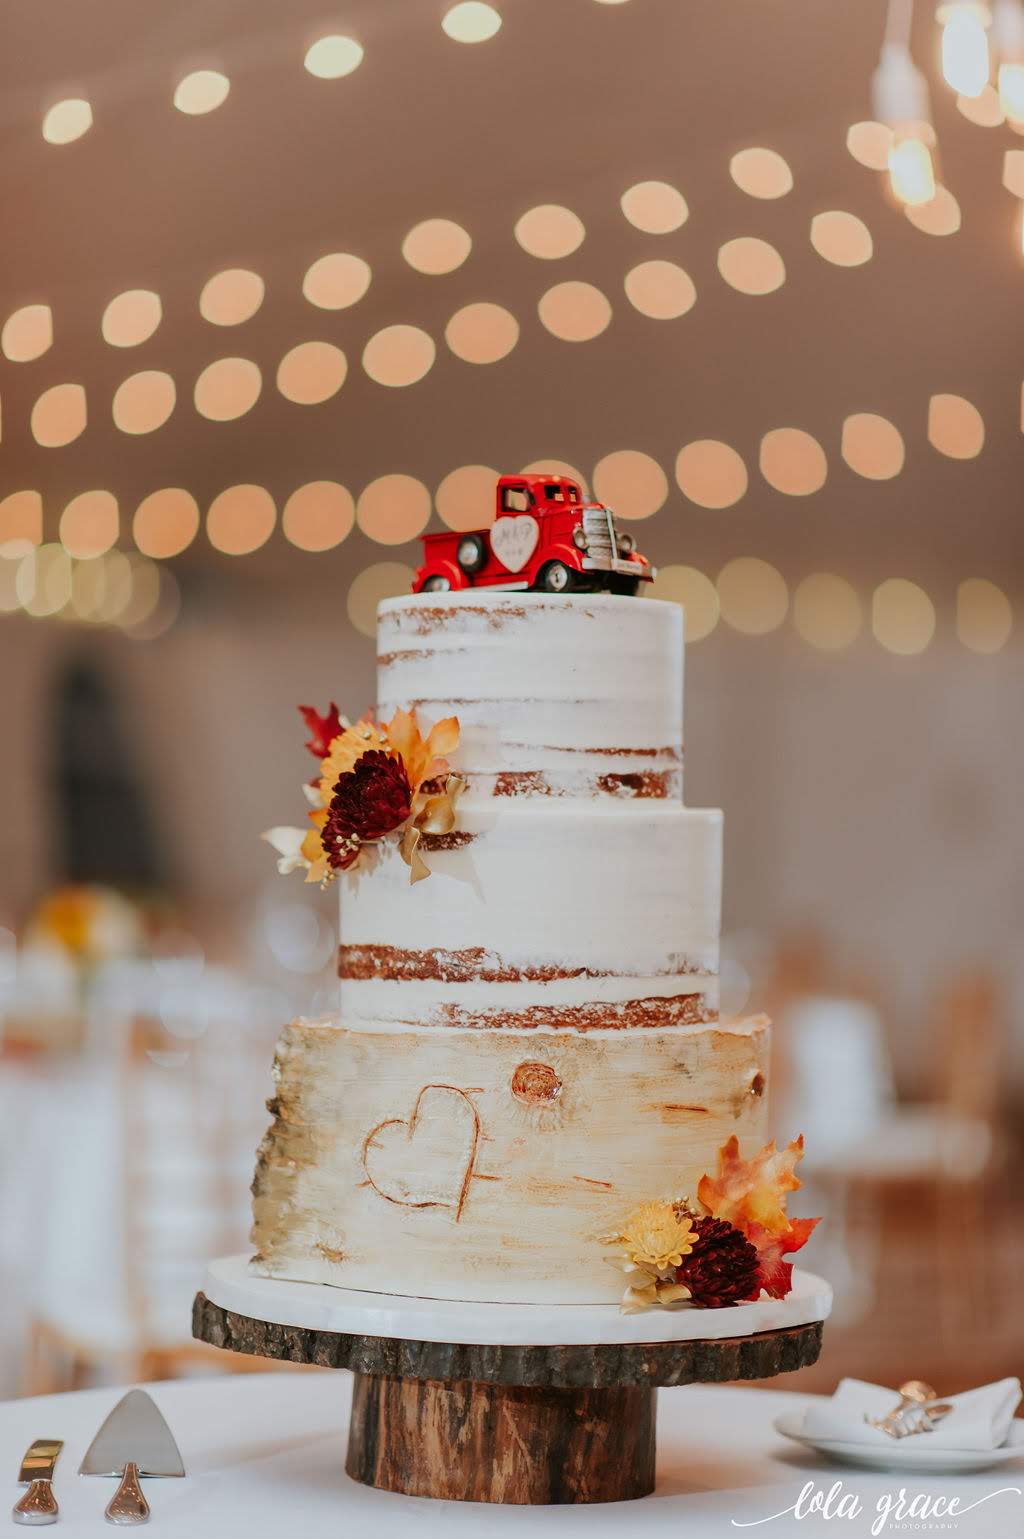 Their meaningful cake topper was modeled after Paul’s grandfather’s truck.